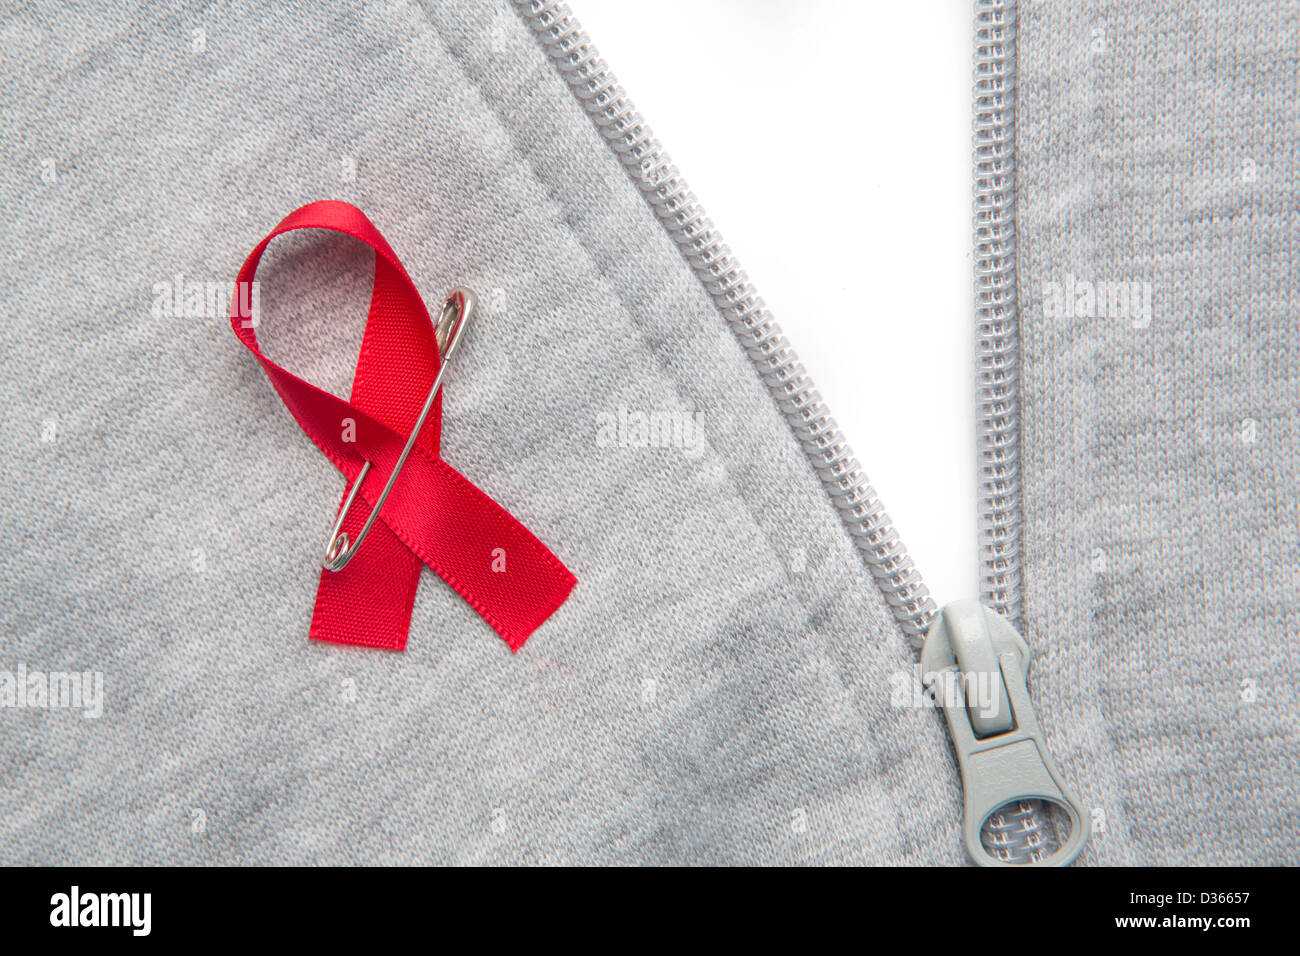 Aids awareness ribbon pinned on to grey zip jumper Stock Photo